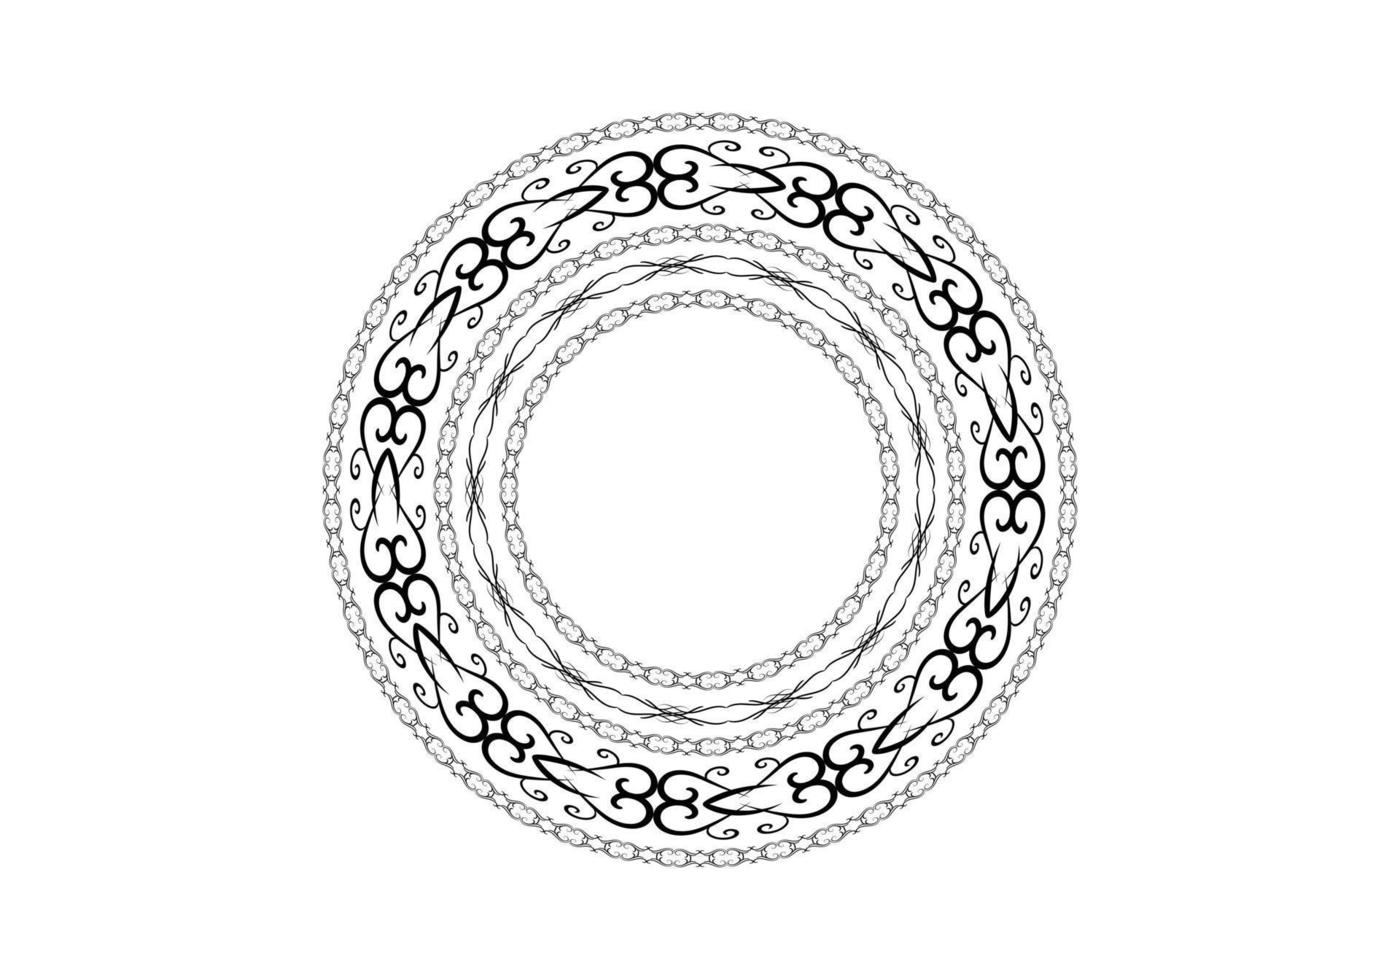 Decoration and ornaments elements set on white background. Floral ornament. vector